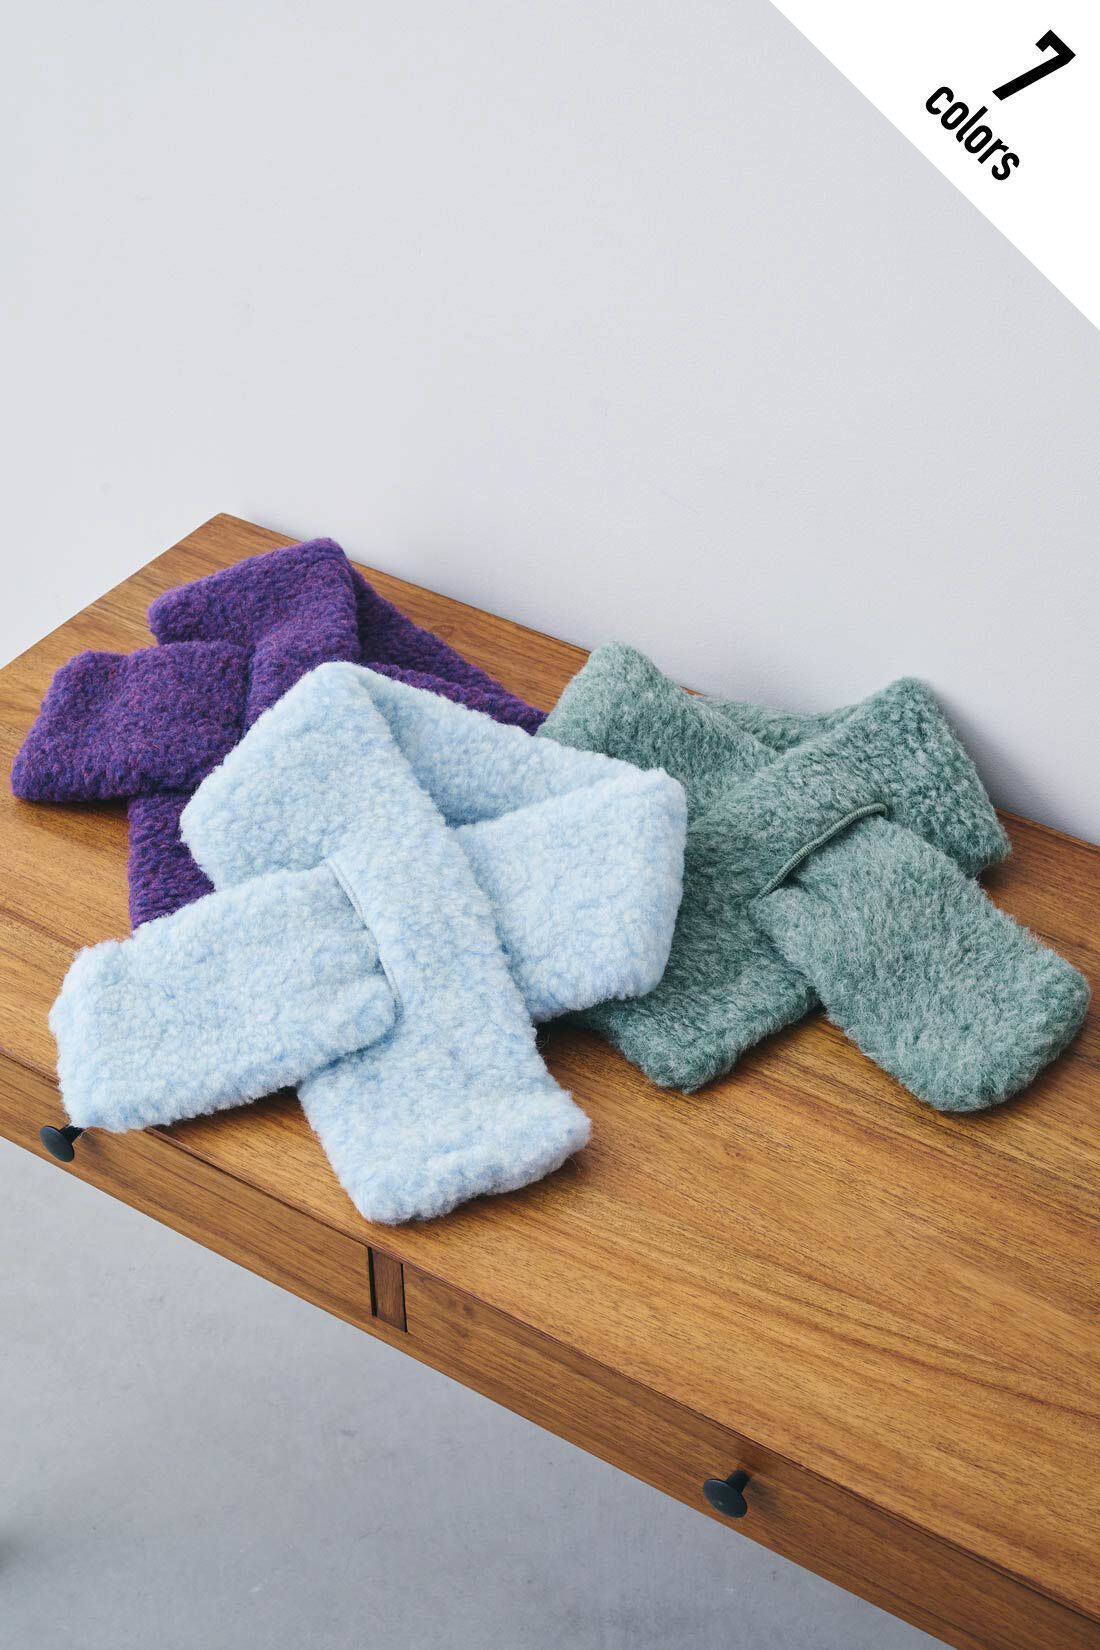 Real Stock|MEDE19F 〈SELECT〉 【SHEEP BY THESEA】 WOOL　マフラー|上から〈VIOLET〉〈LIGHT BLUE〉〈GREEN〉